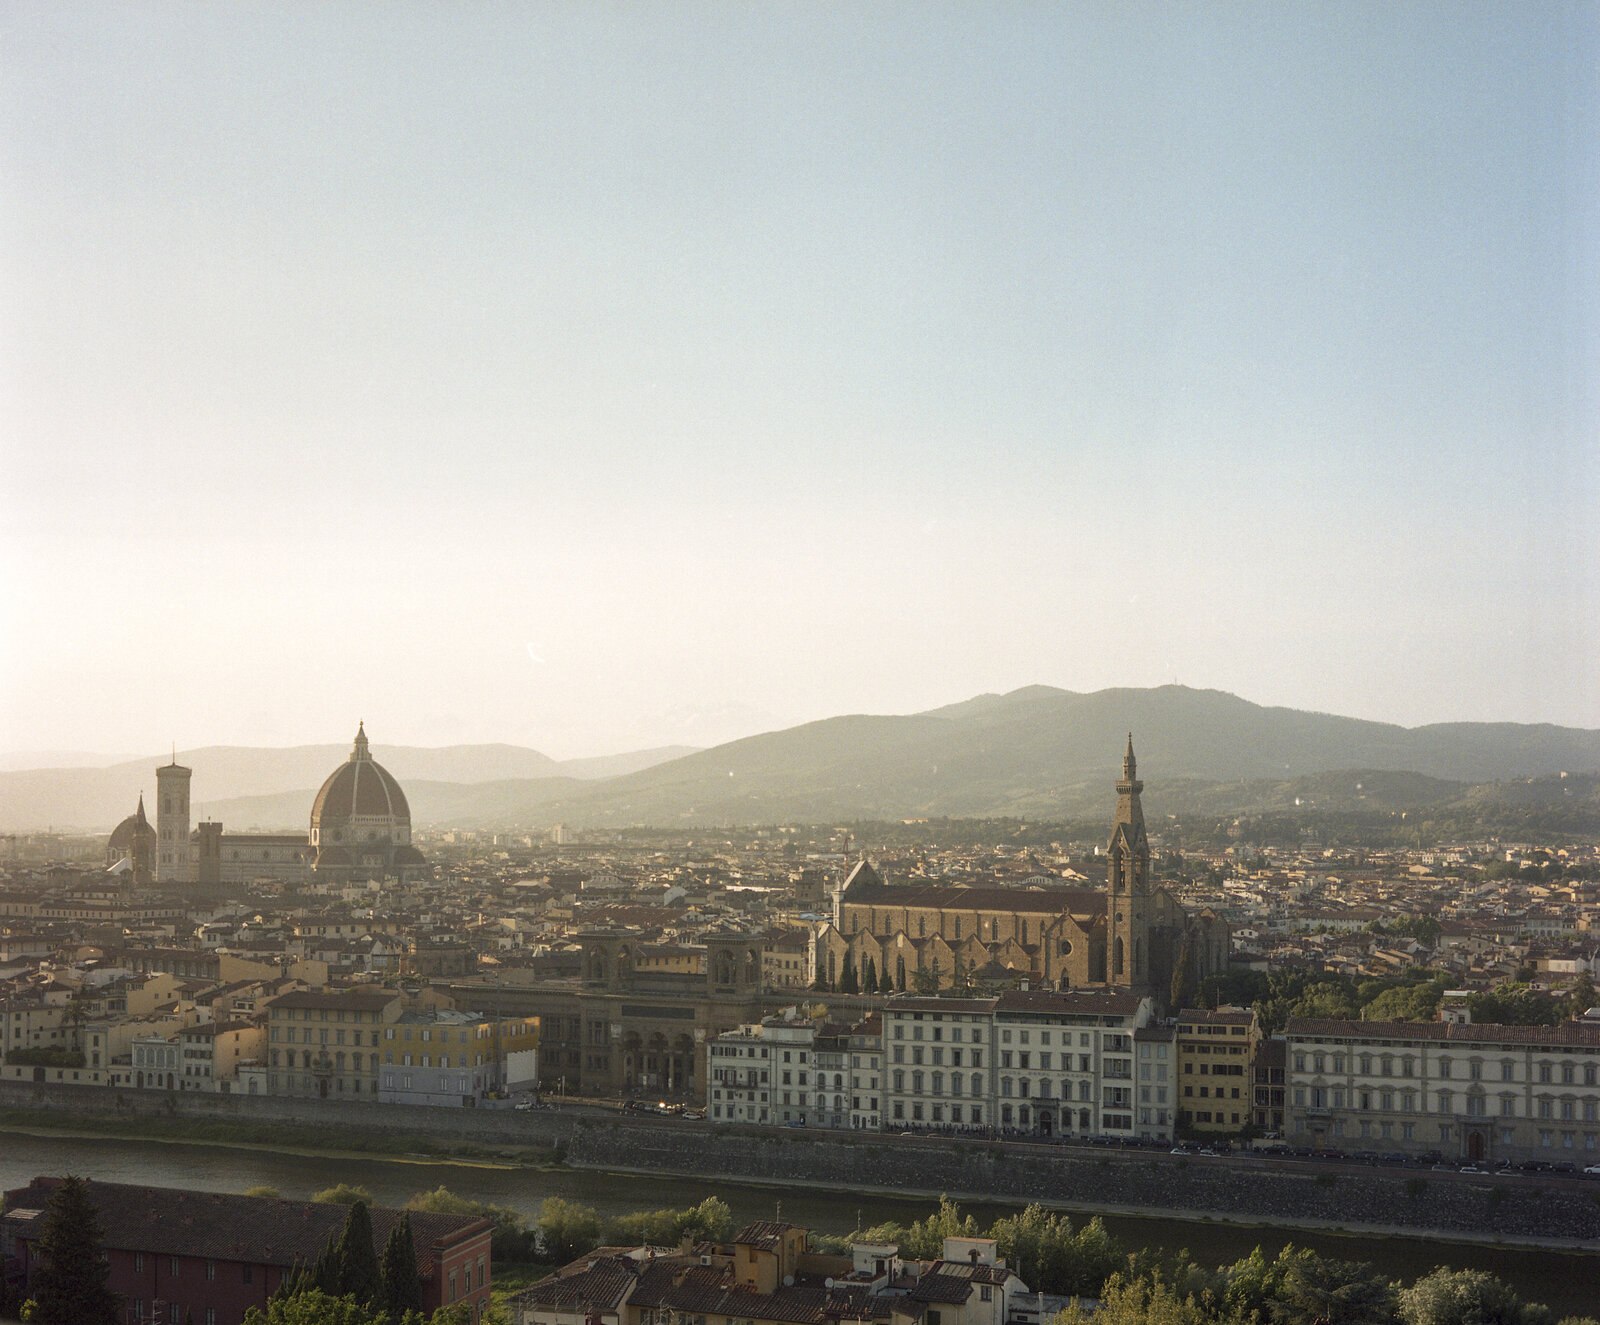 A picture of the city of Florence with Duomo in the background